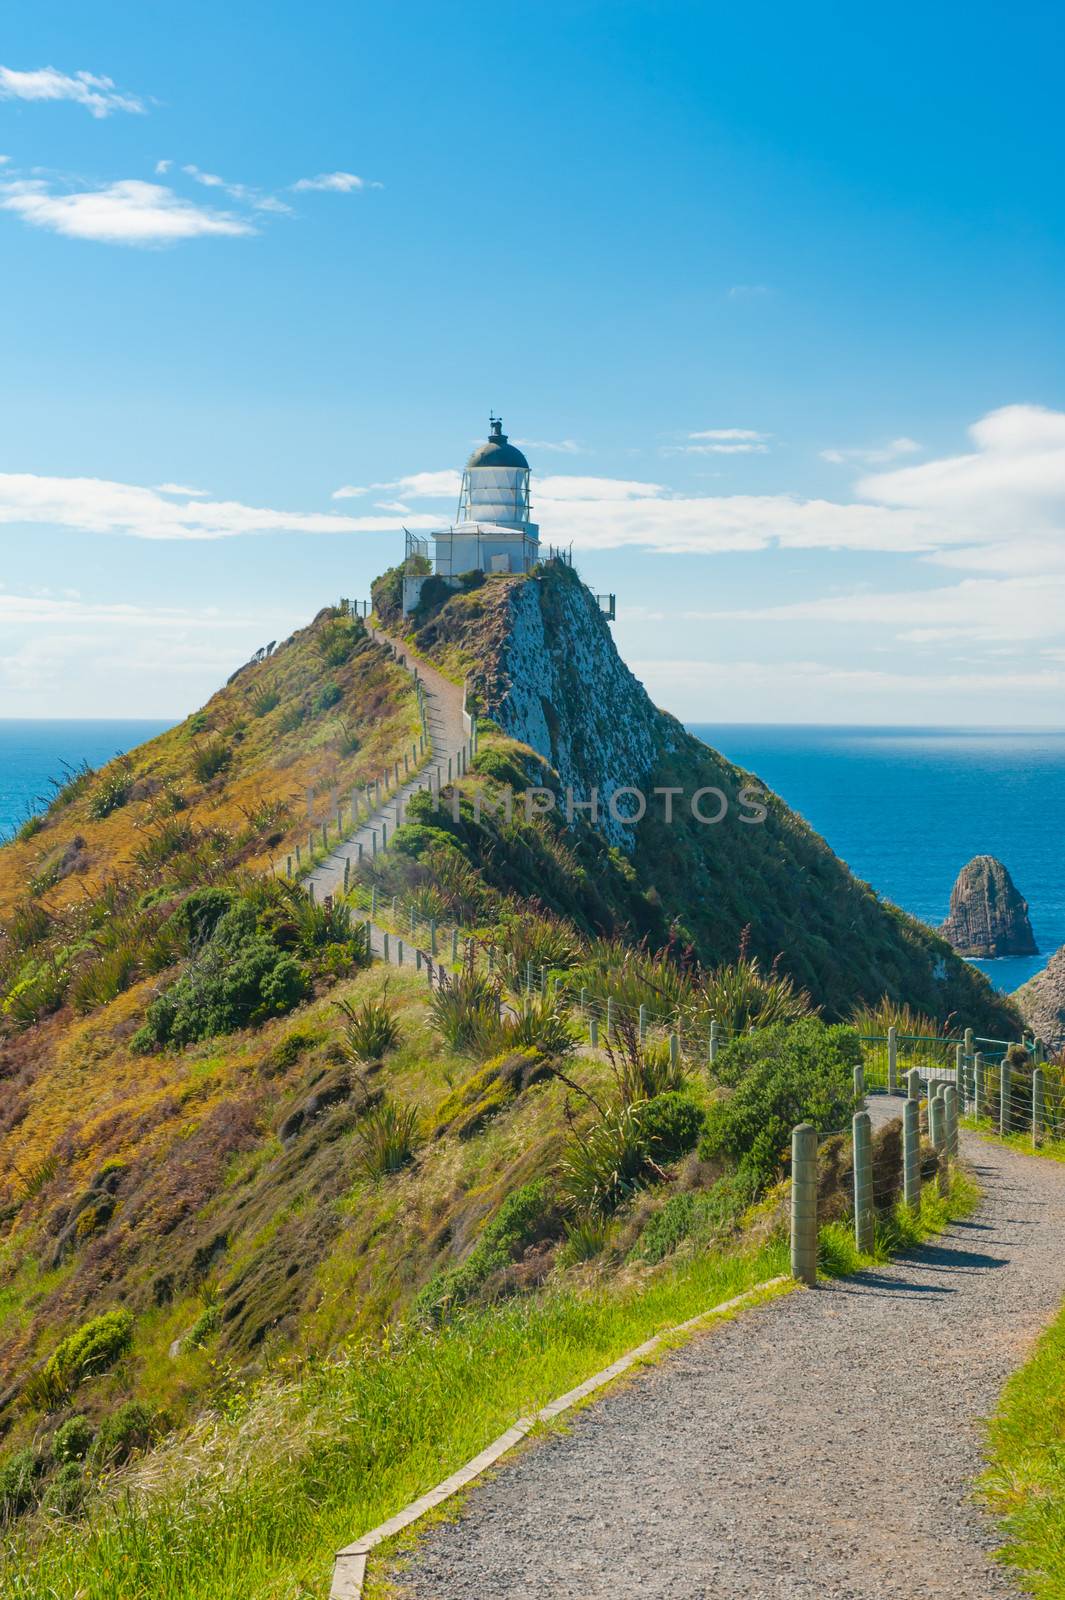 Lighthouse on Nugget Point. It is located in the Catlins area on the Southern Coast of New Zealand, Otago region. The Lighthouse is surrounded by small rock islands, nuggets